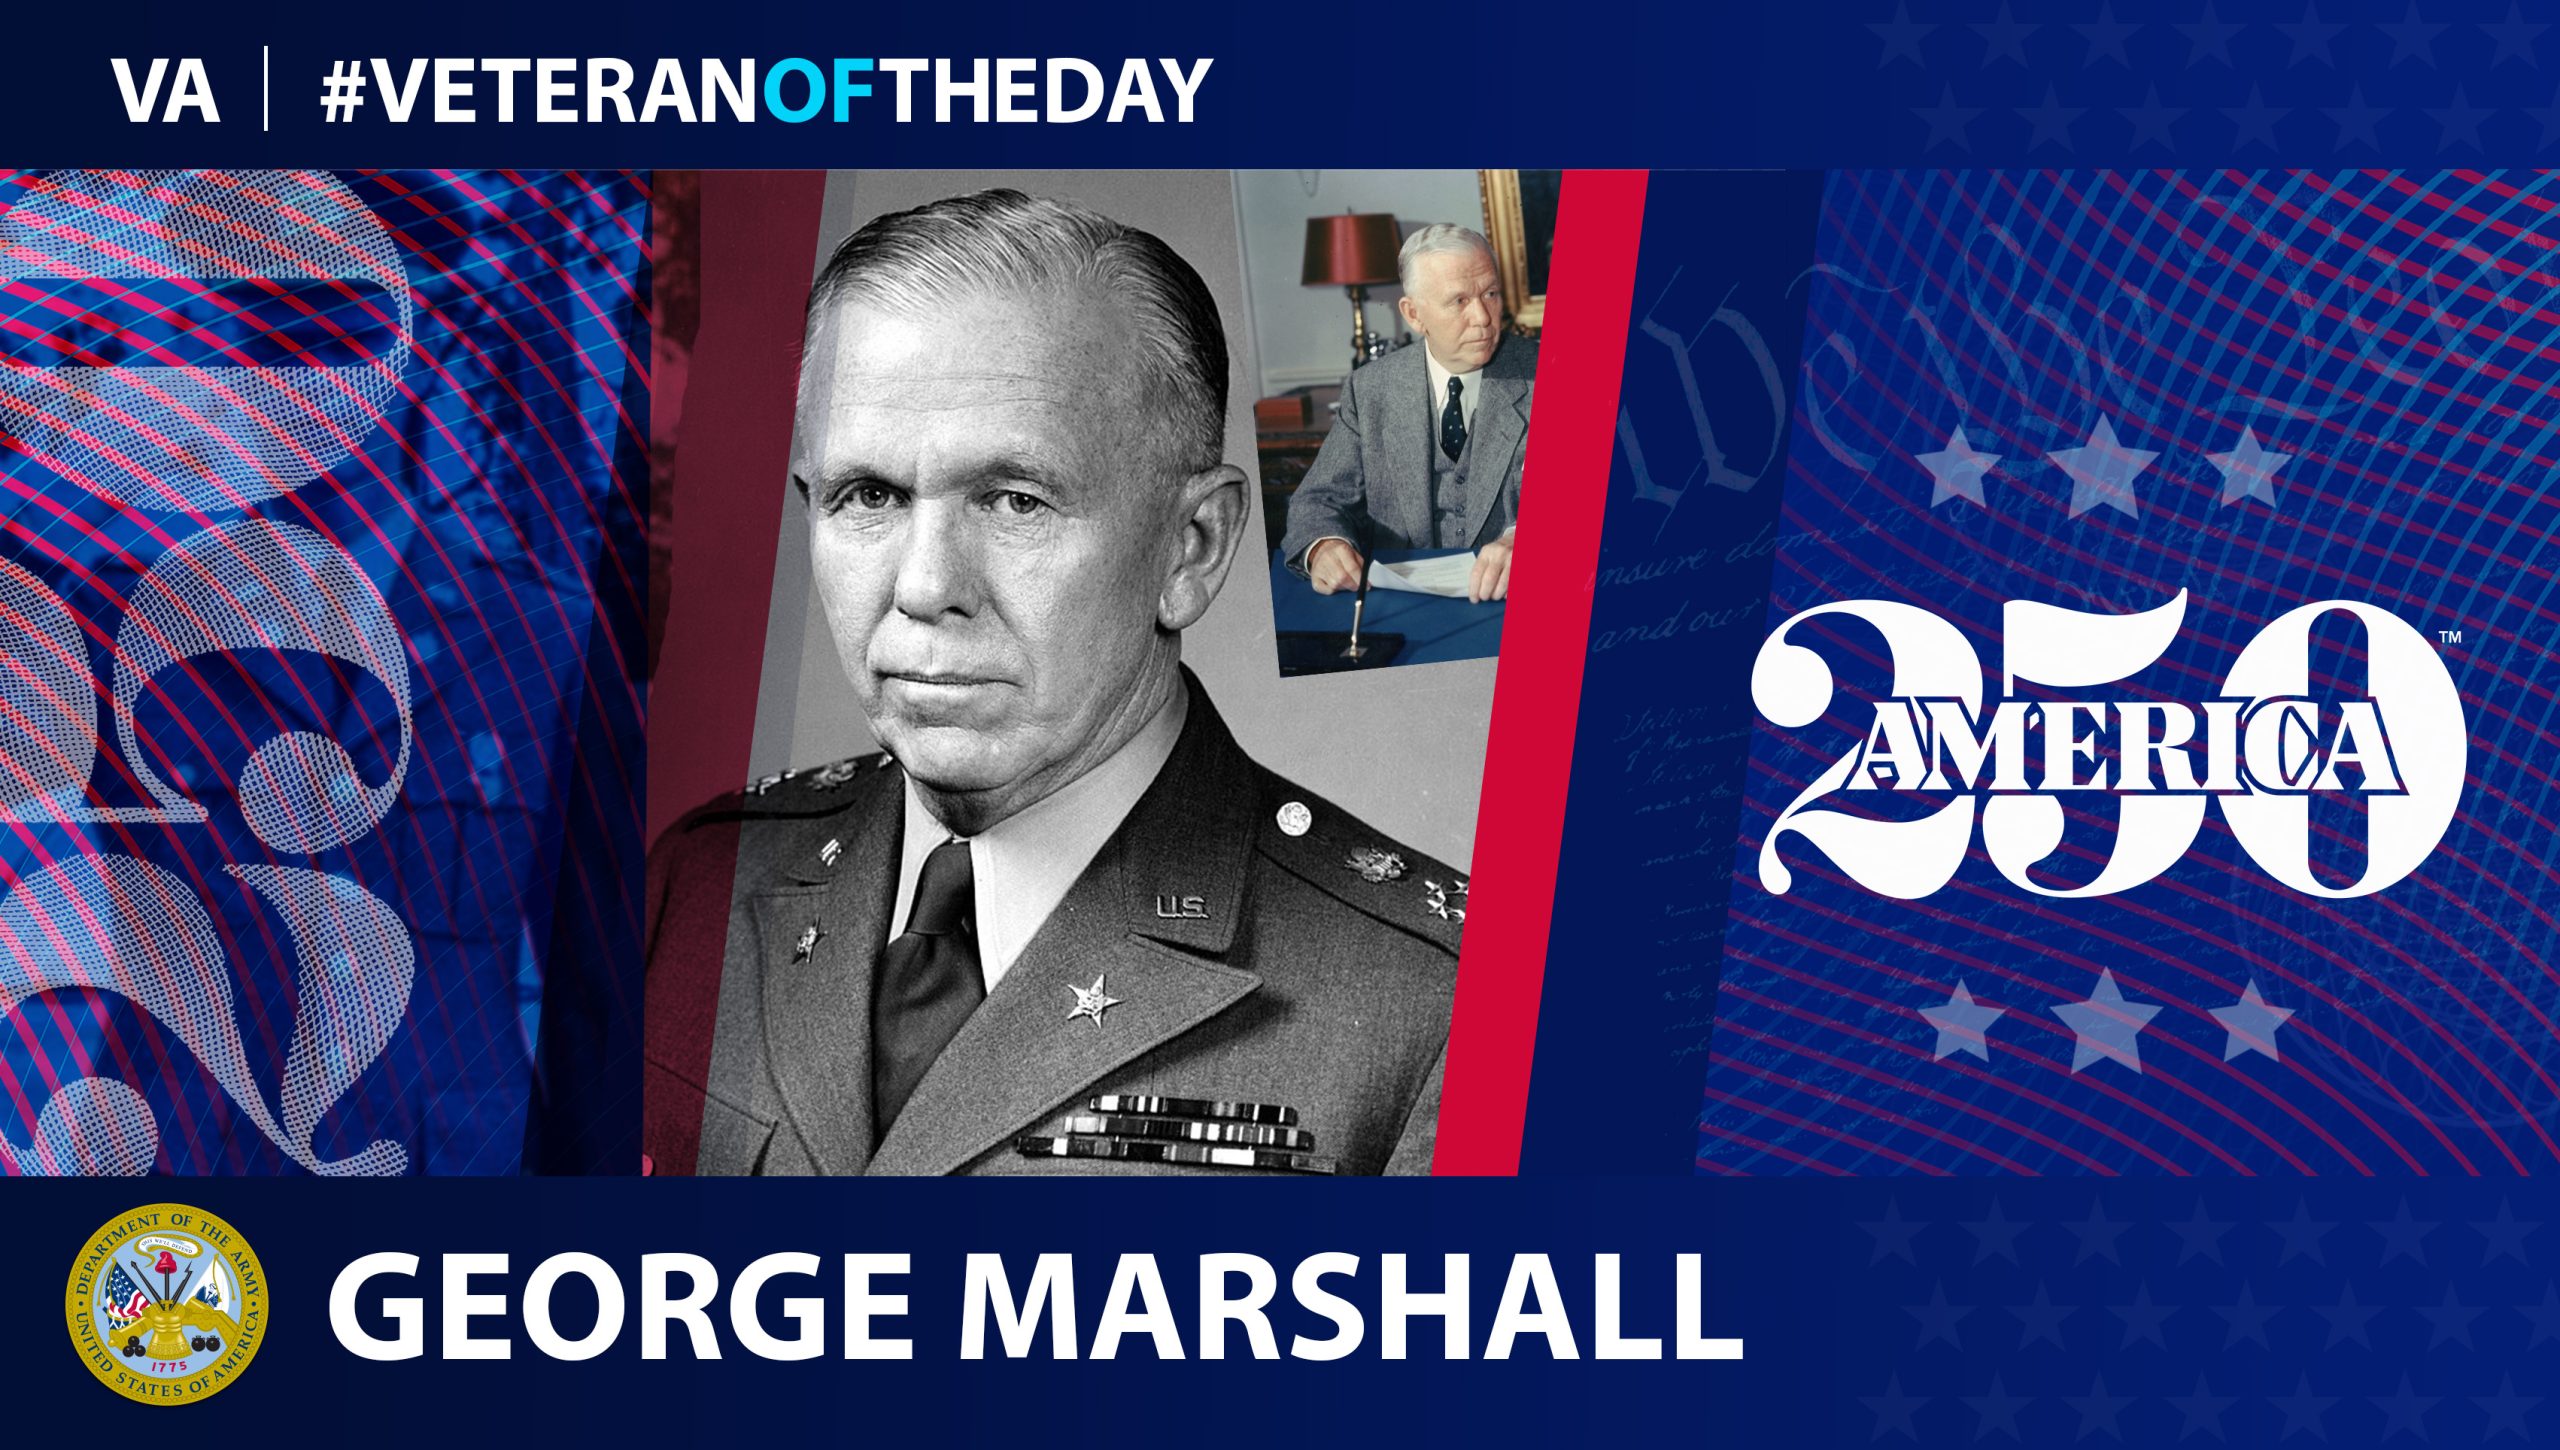 Army Veteran George Marshall is today’s Veteran of the Day.